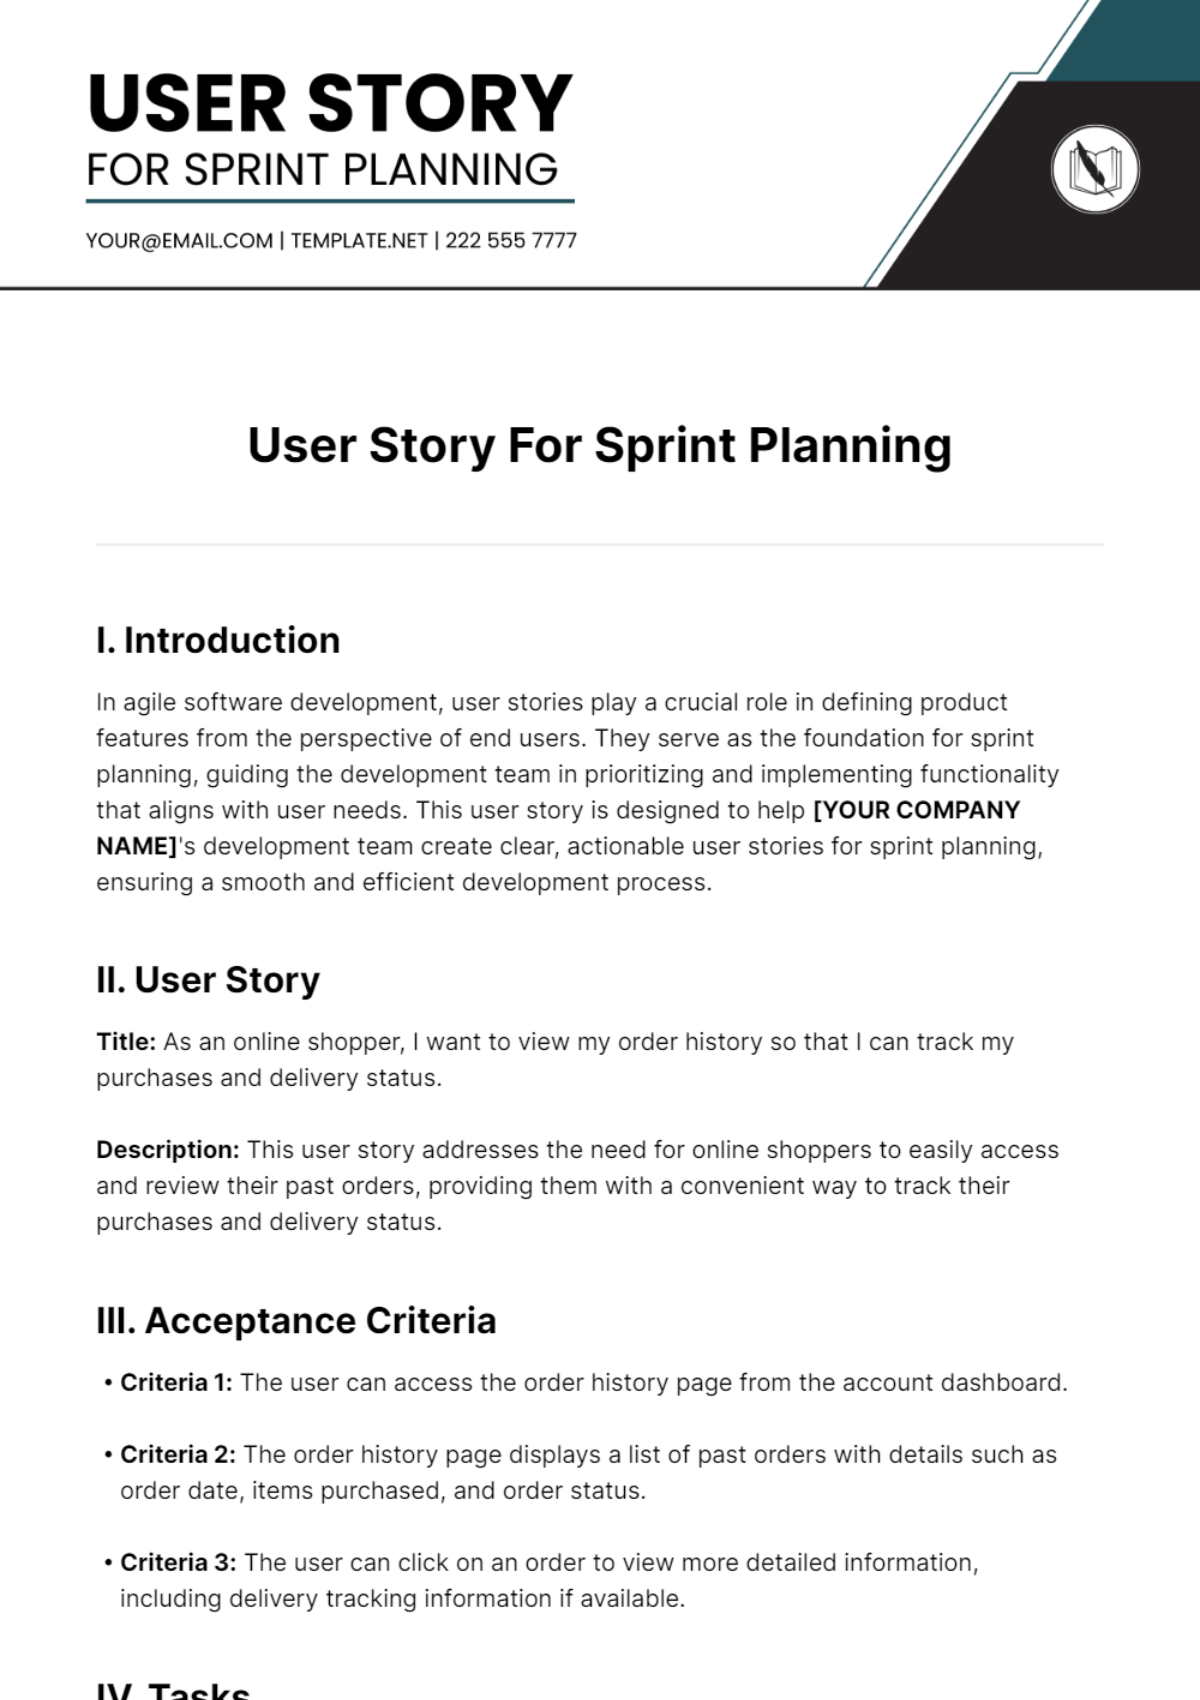 Free User Story For Sprint Planning Template